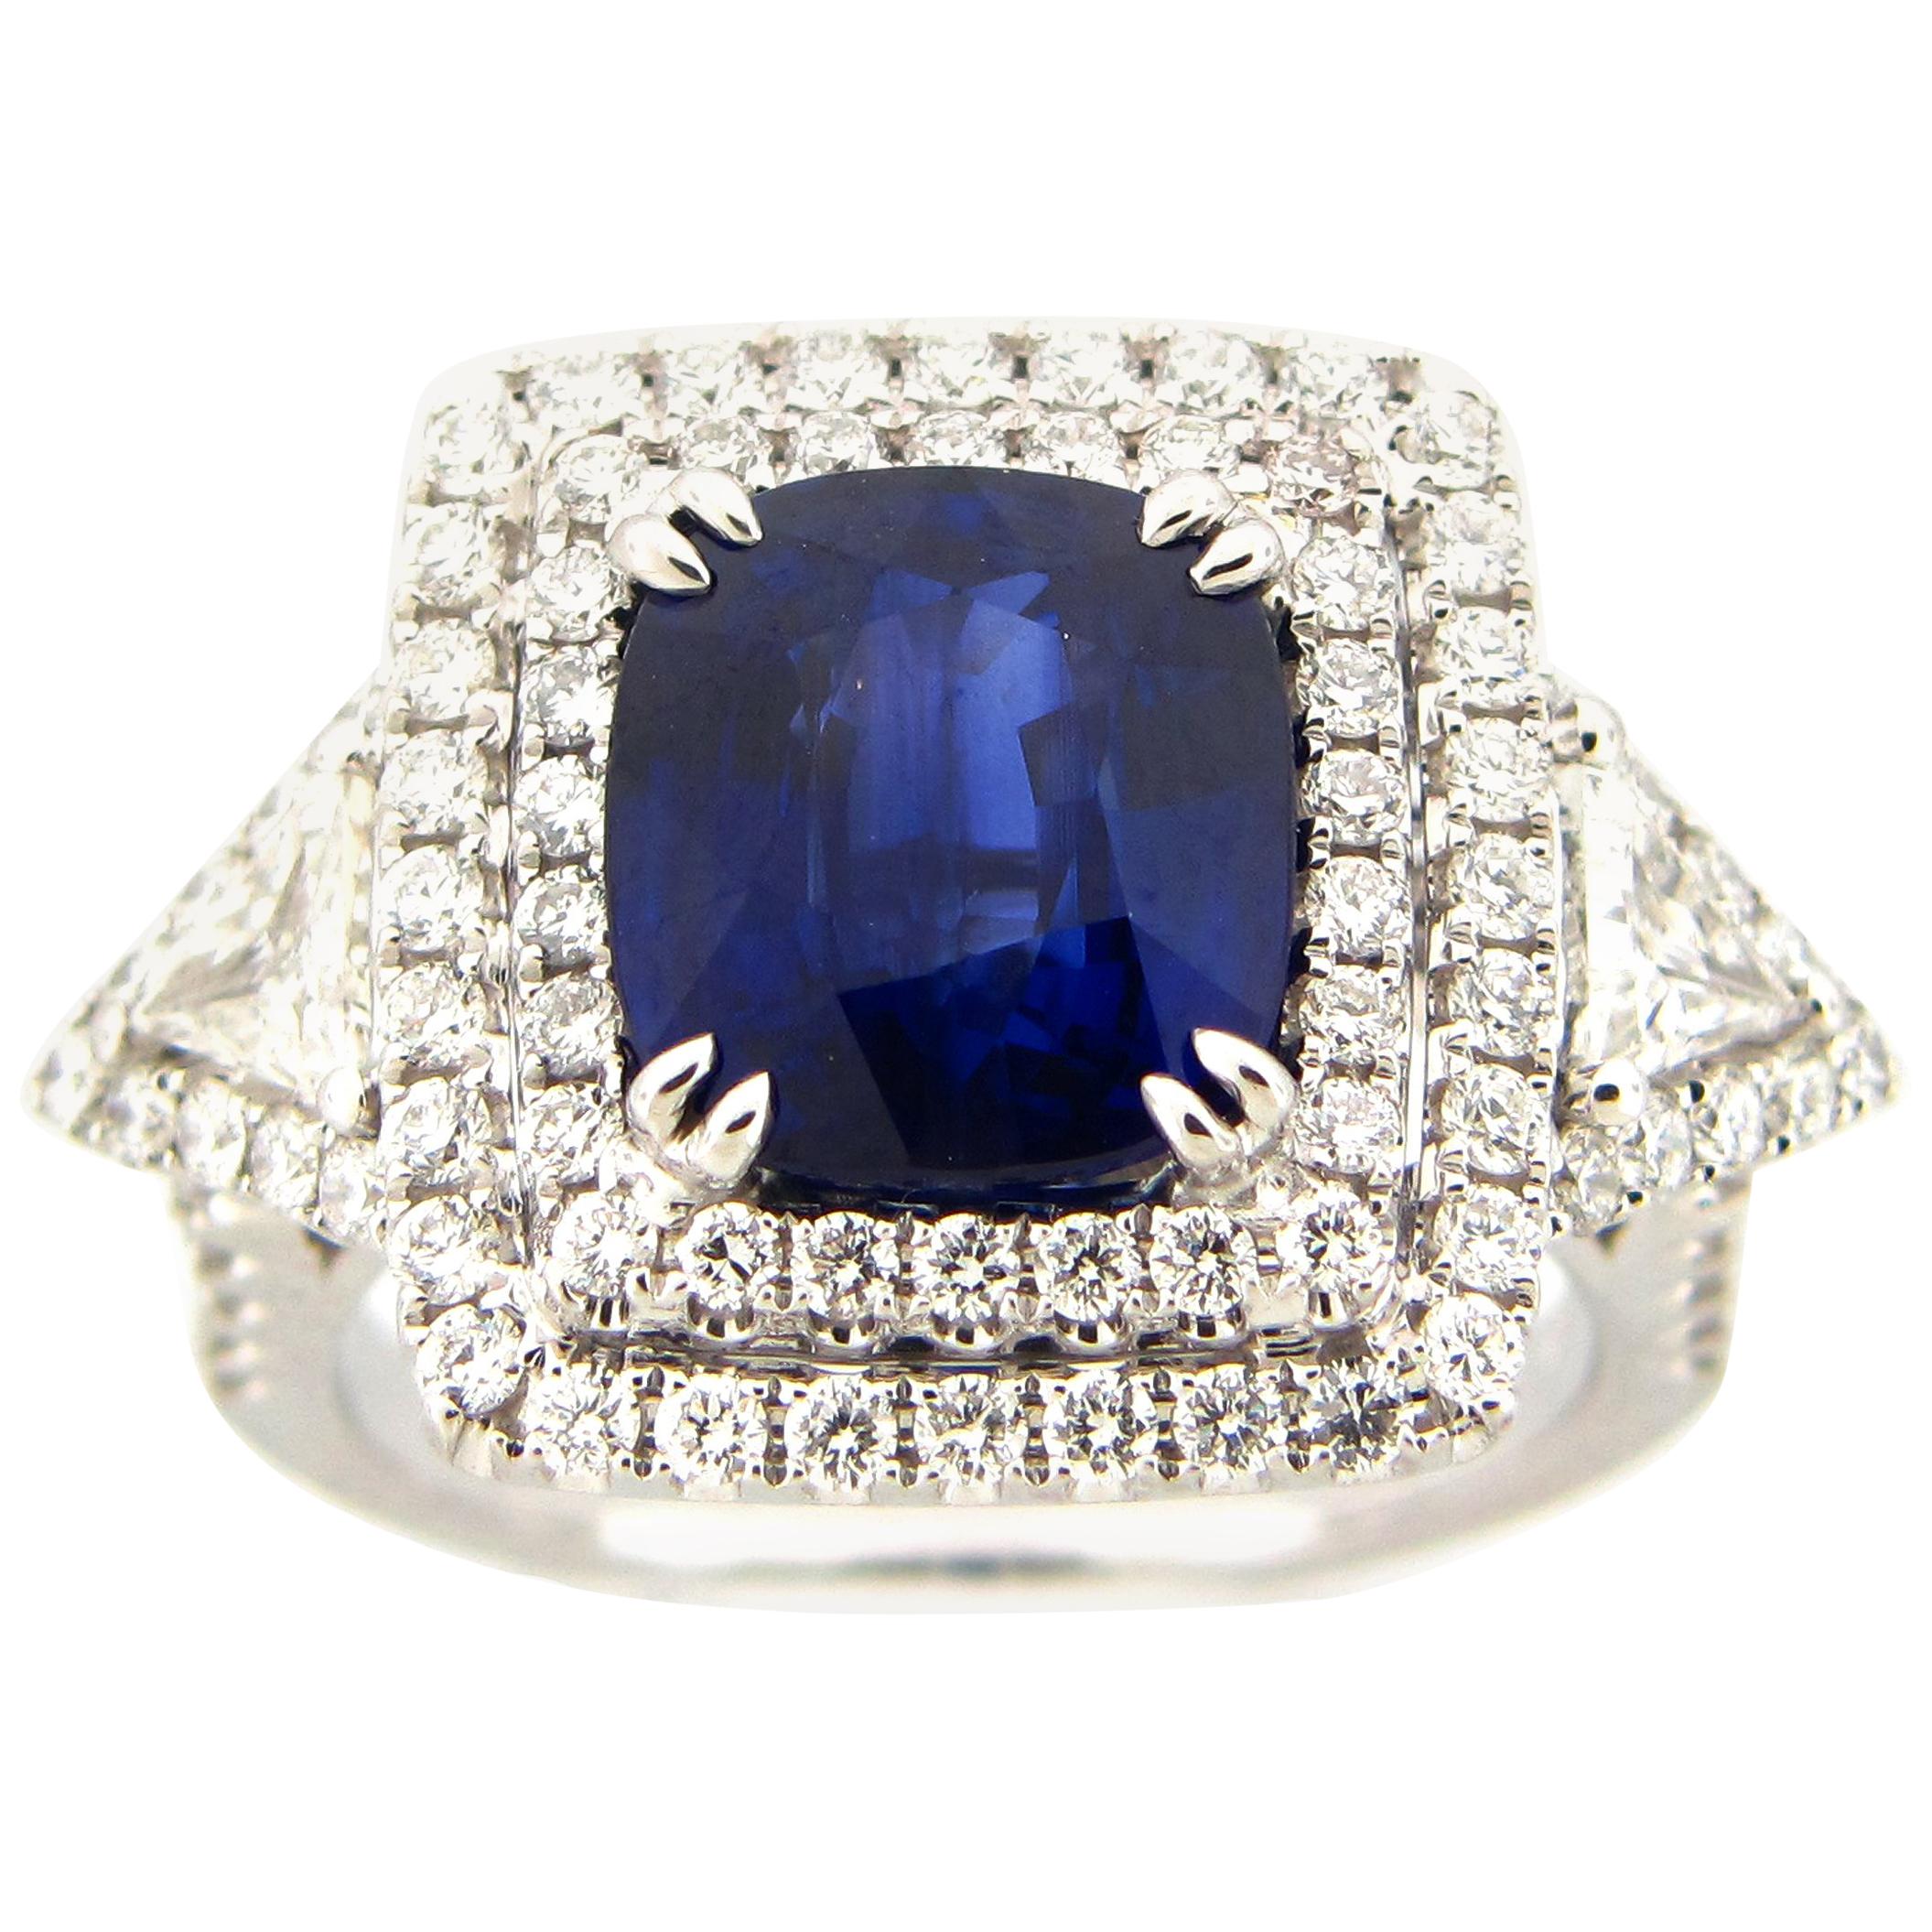 GIA Certified 4.04 Carat Sapphire and Diamond Cocktail Ring